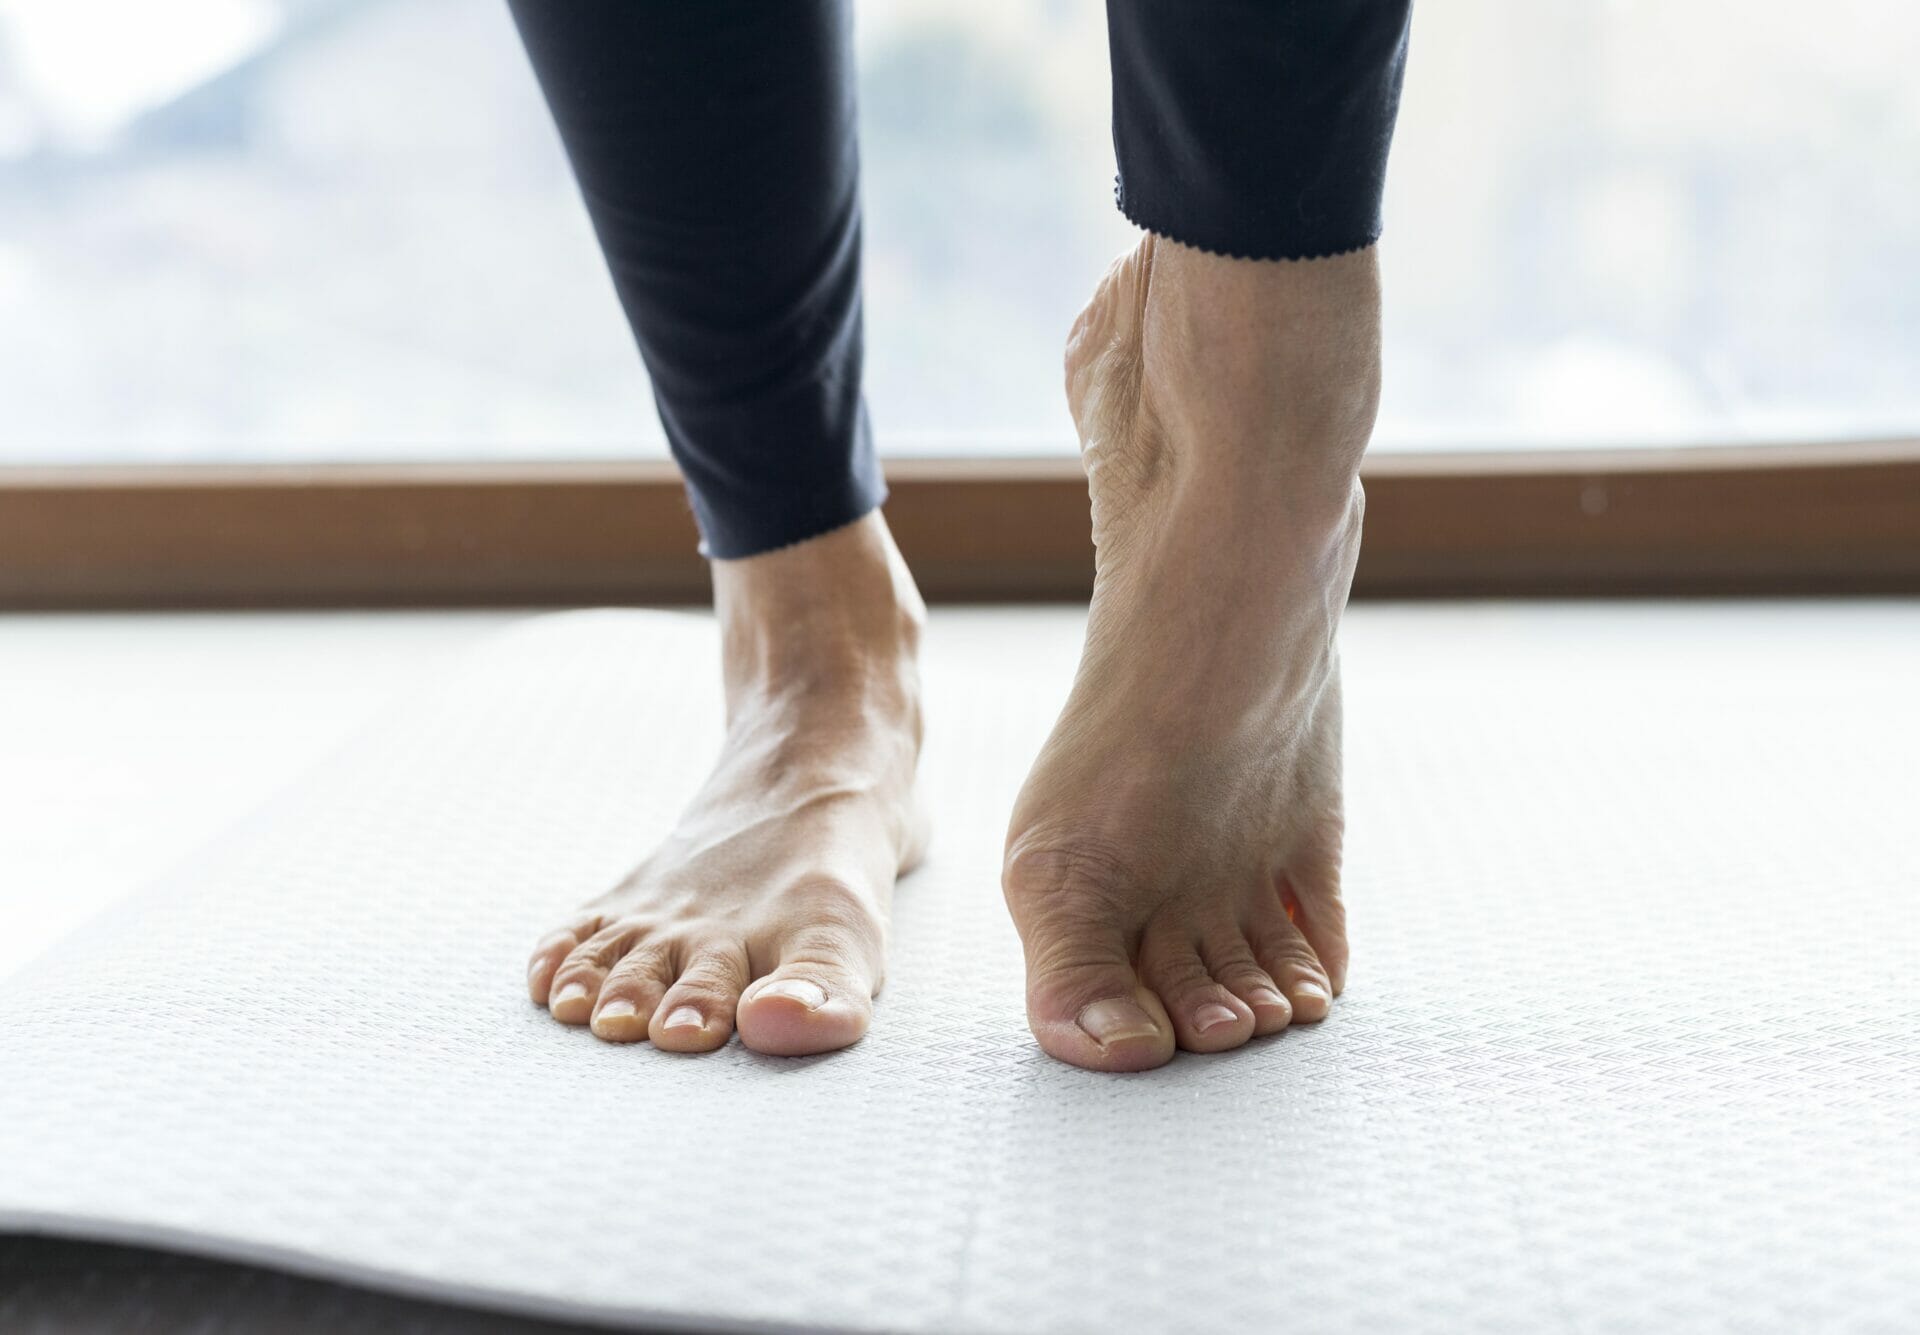 5 Best Foot Exercises to Do At Home for Healthy Feet